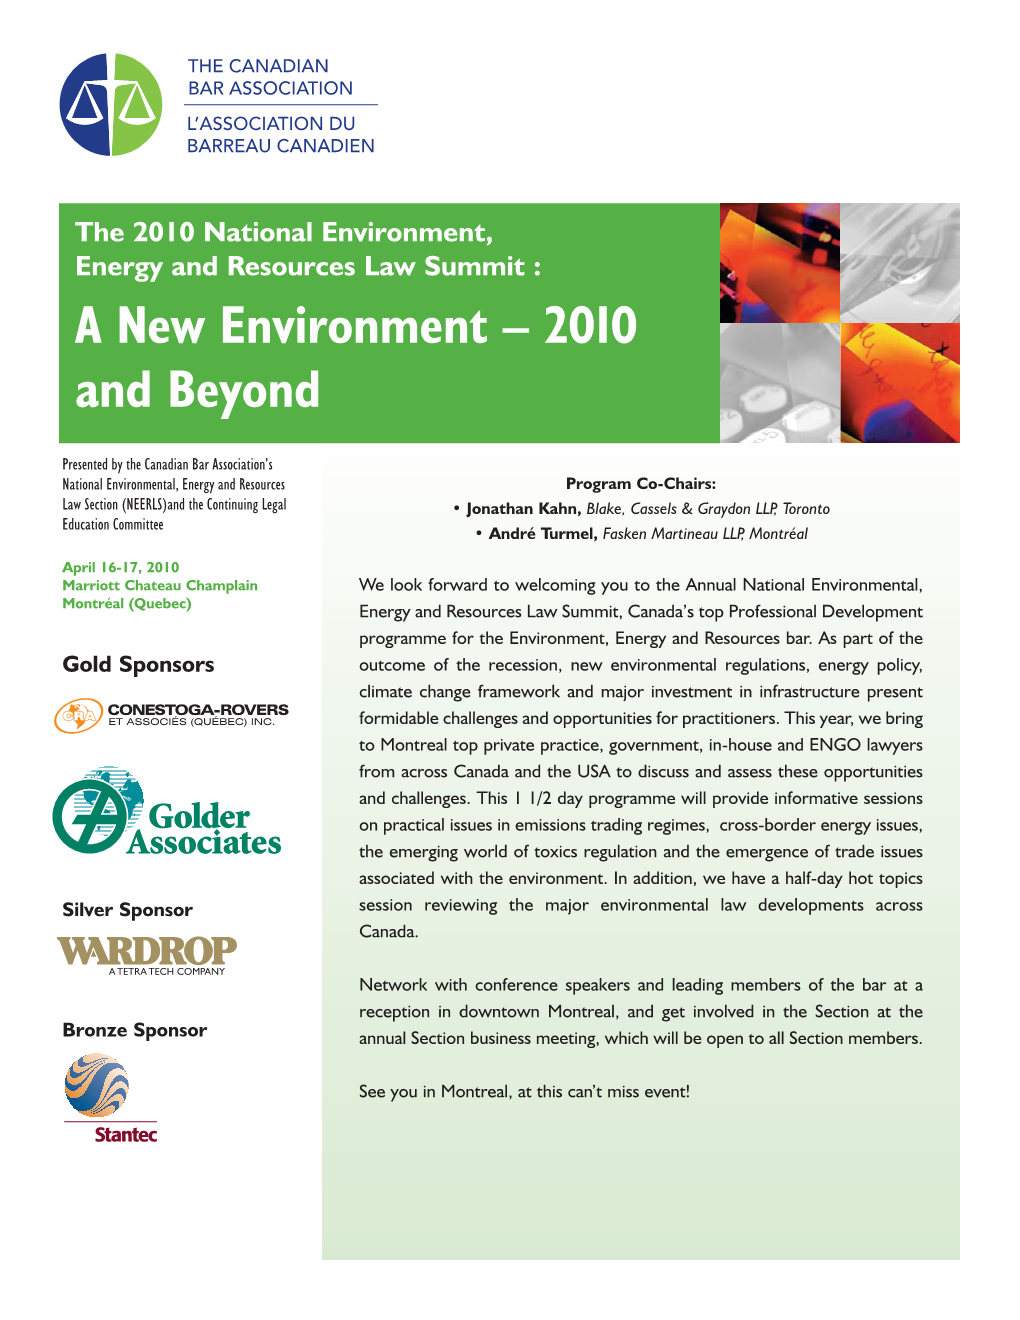 A New Environment – 2010 and Beyond